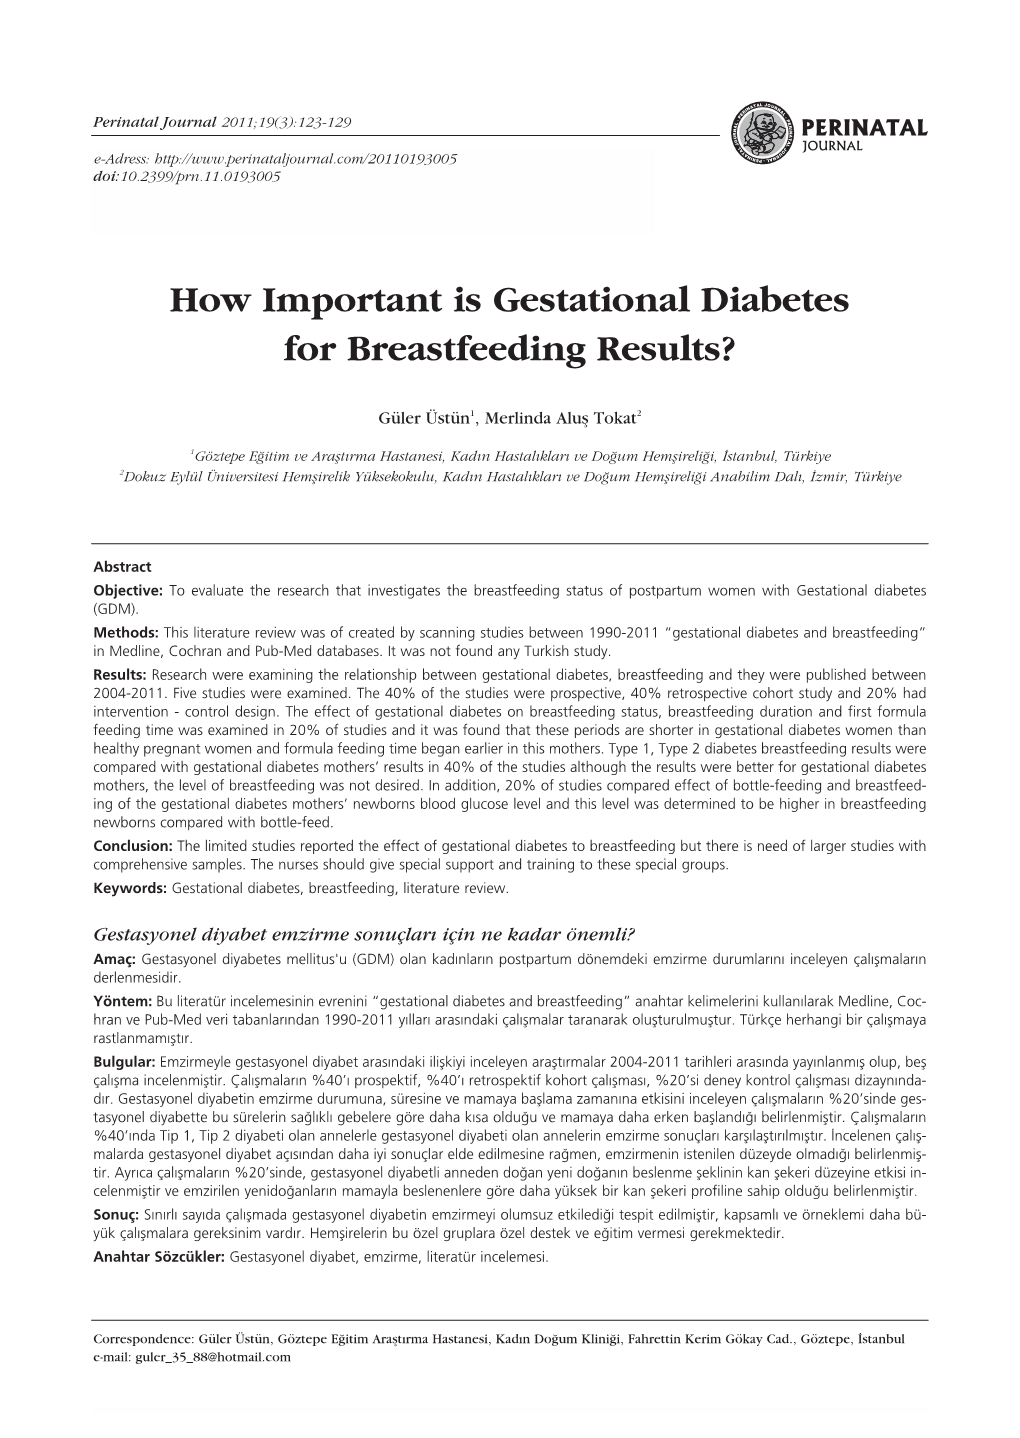 How Important Is Gestational Diabetes for Breastfeeding Results?